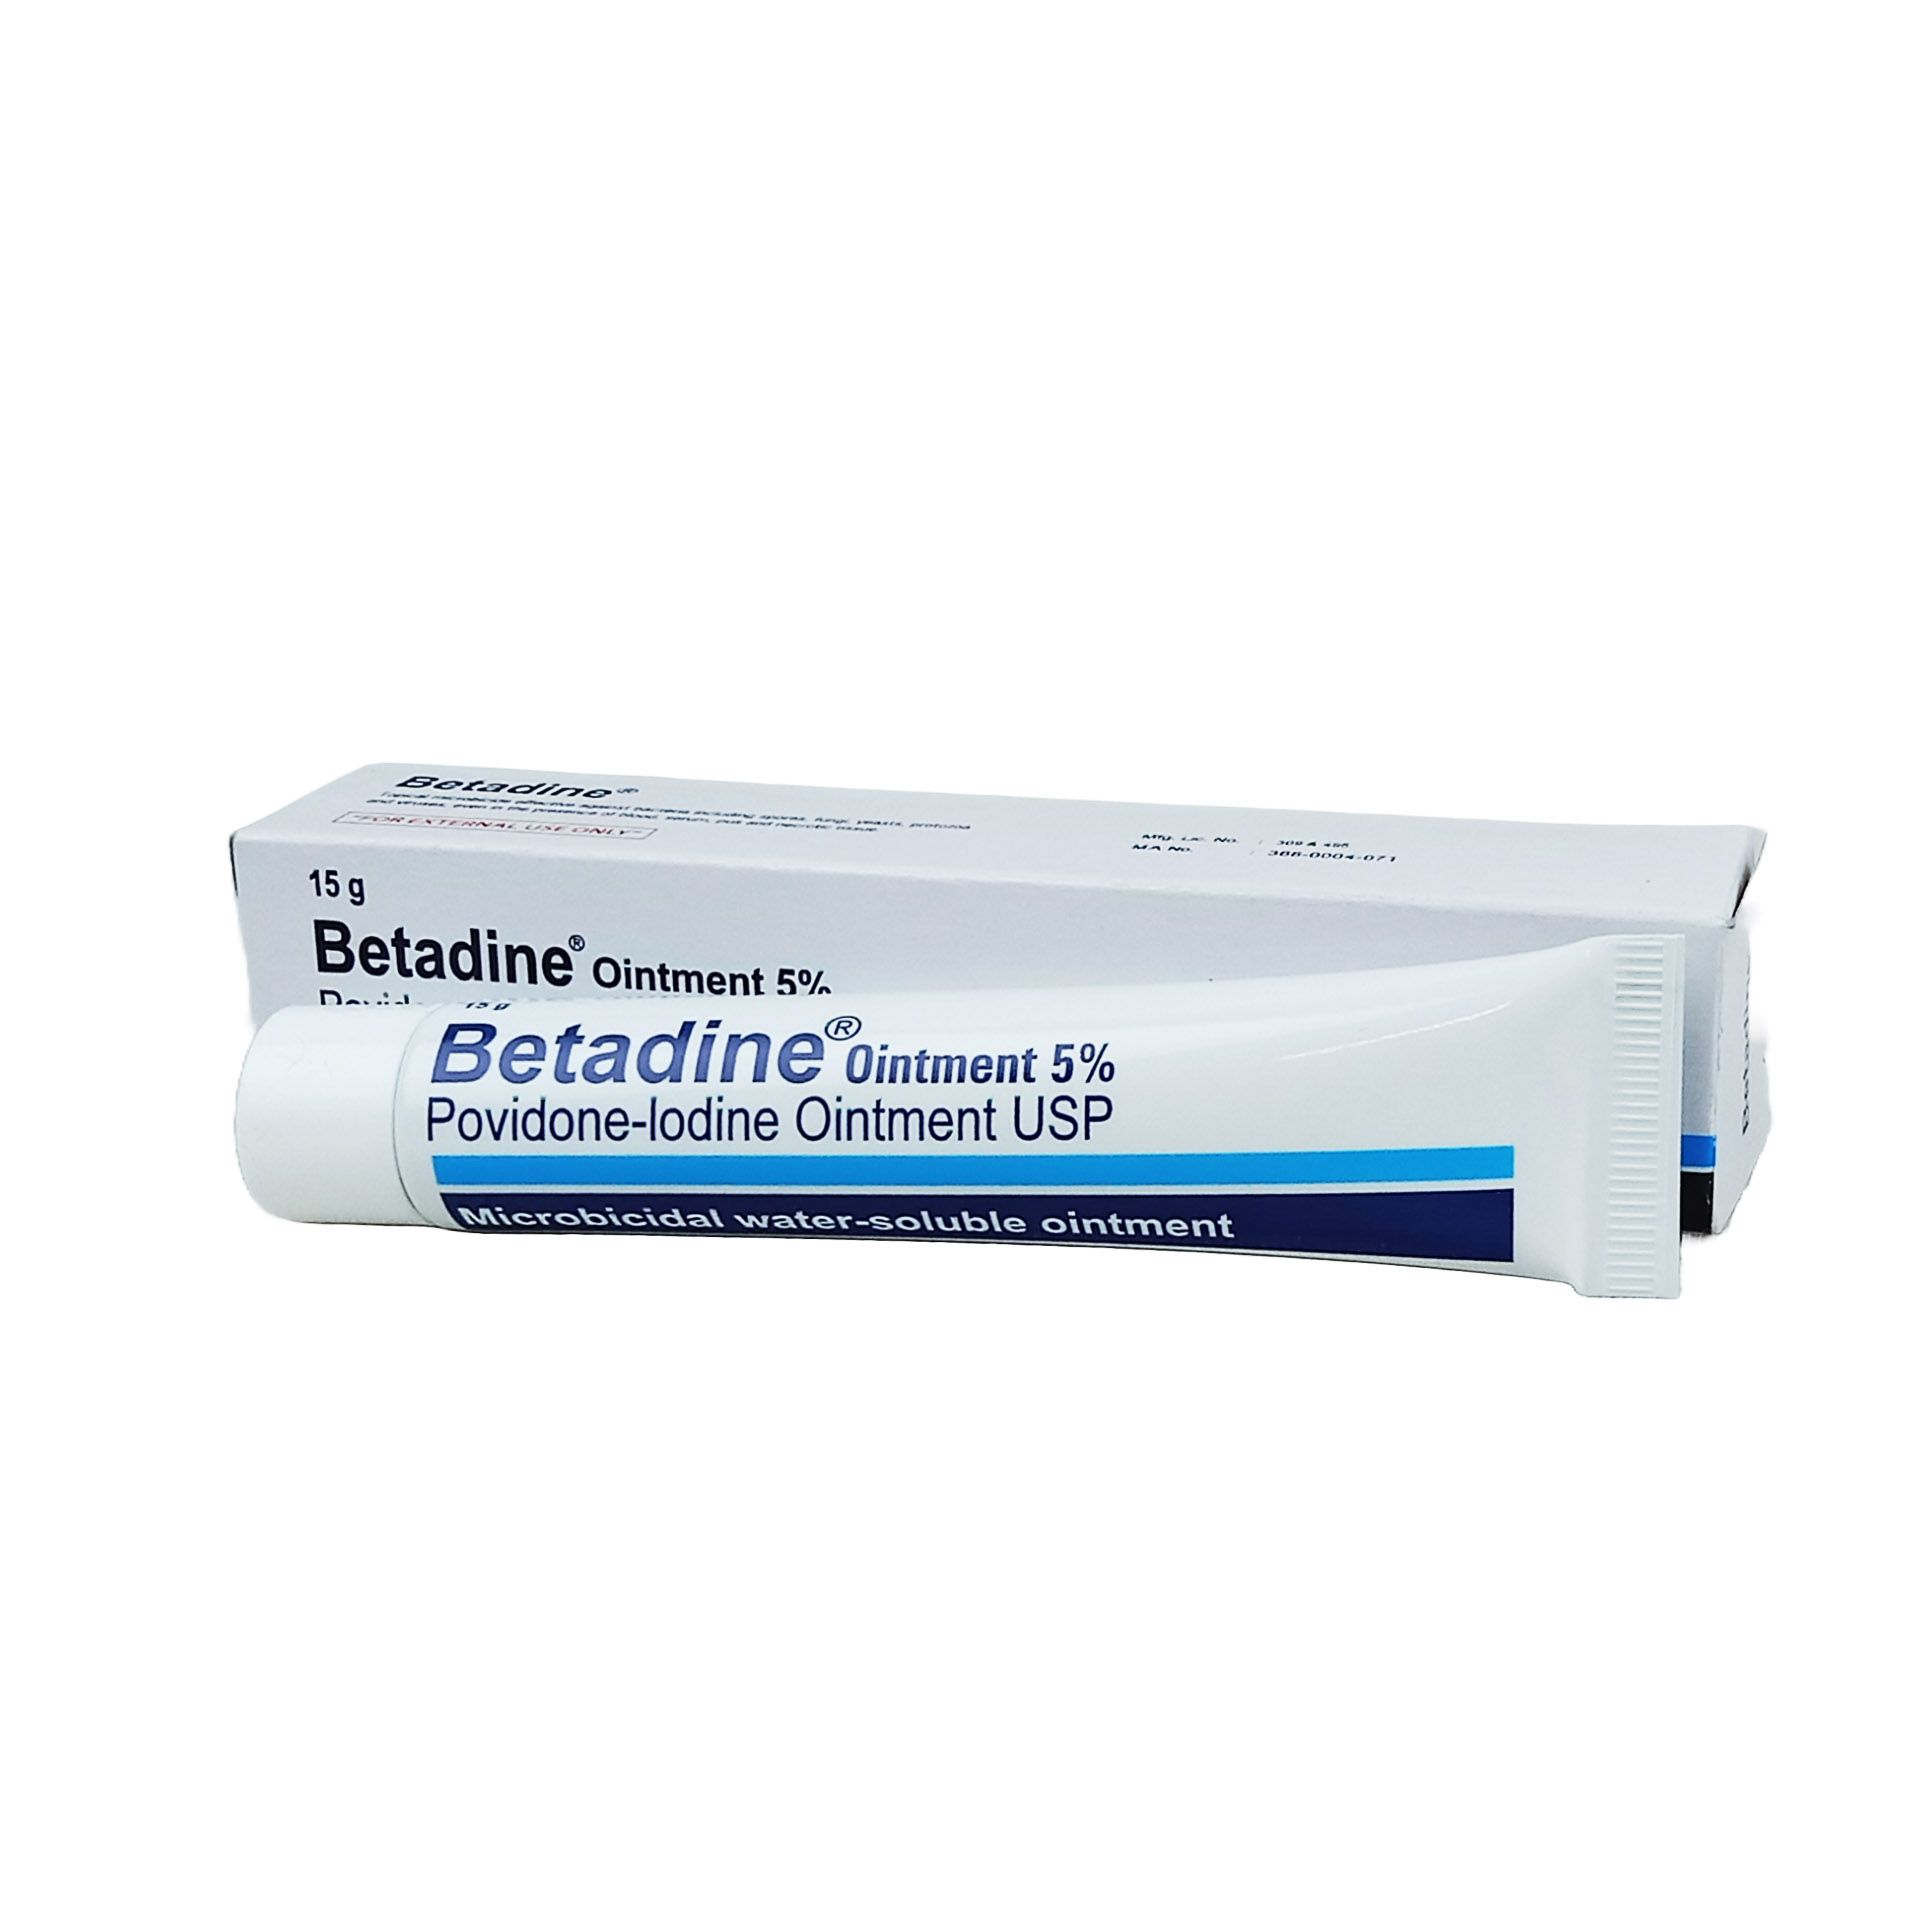 Betadine Ointment 5% Ointment